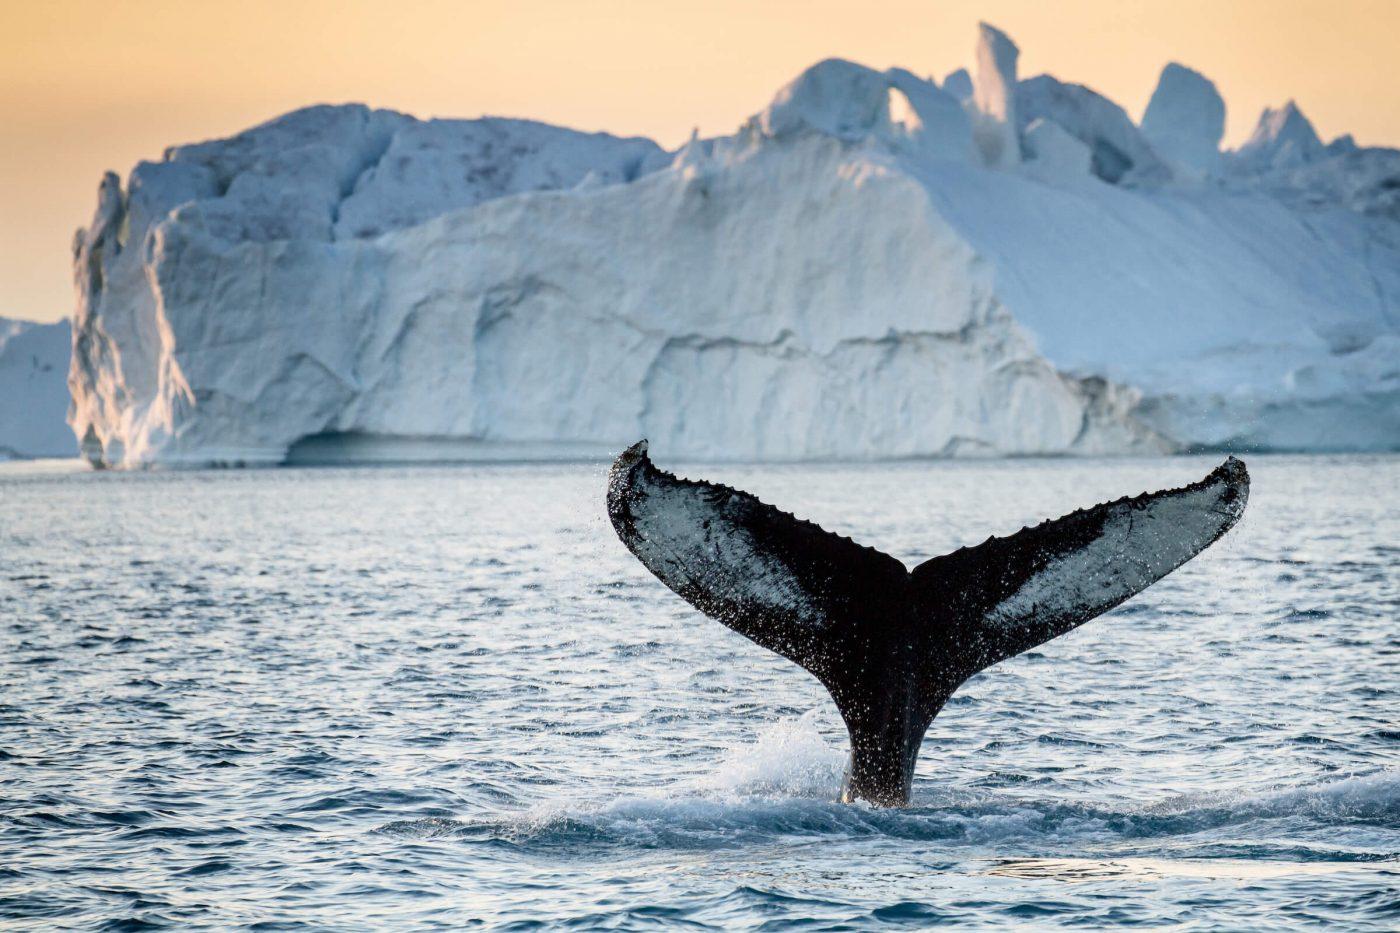 Humpback whale in front of big iceberg in Greenland, by Julie Skotte